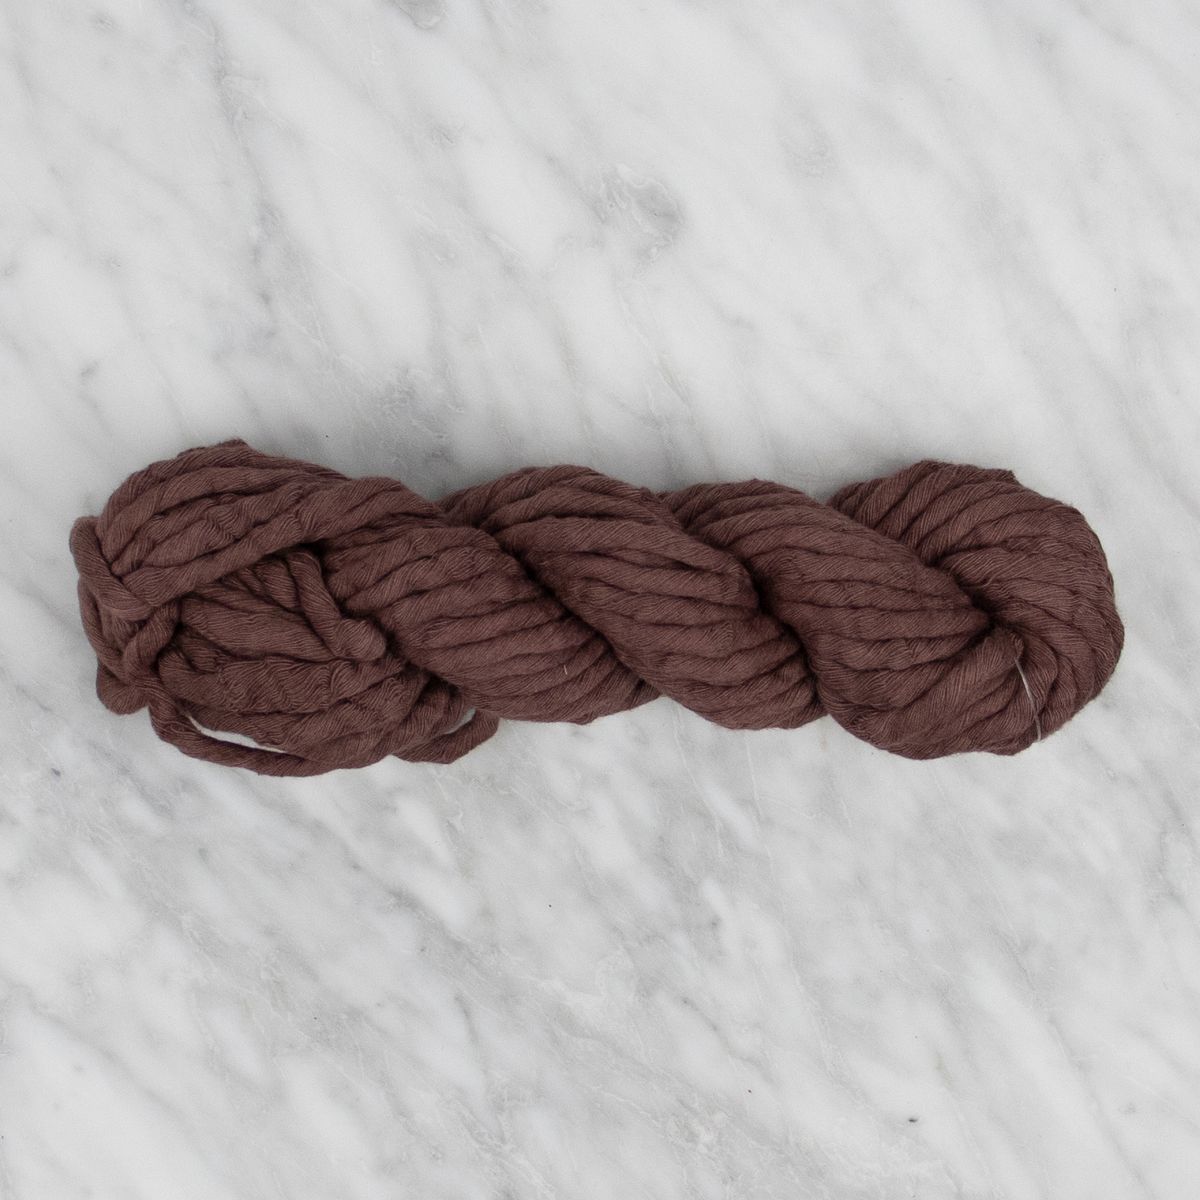 5mm Hand-Dyed Cotton String - Red Oak - 100 grams